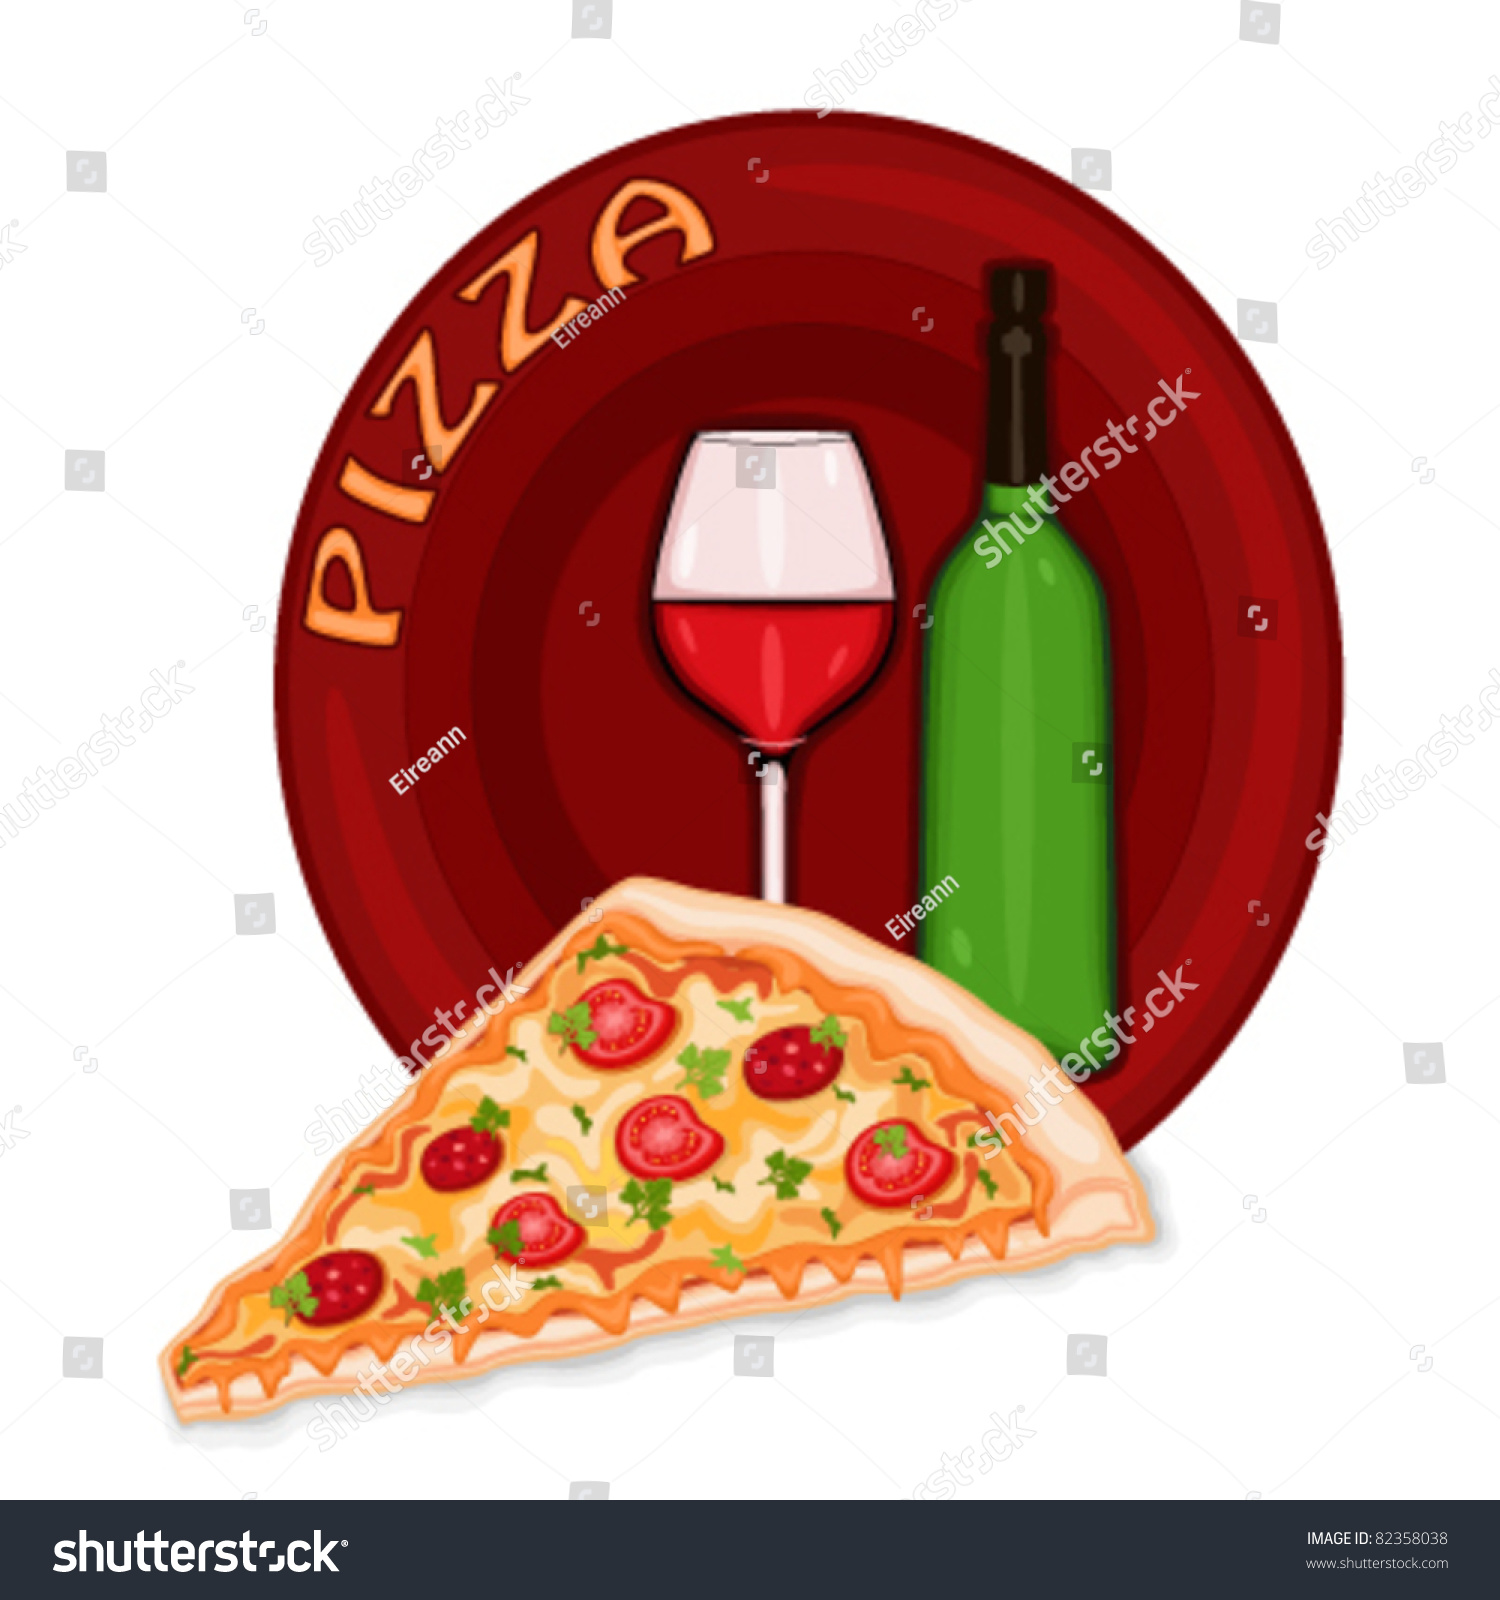 Slice Of Pizza Icon With Bottle And Glass Of Red Wine. Italian ...